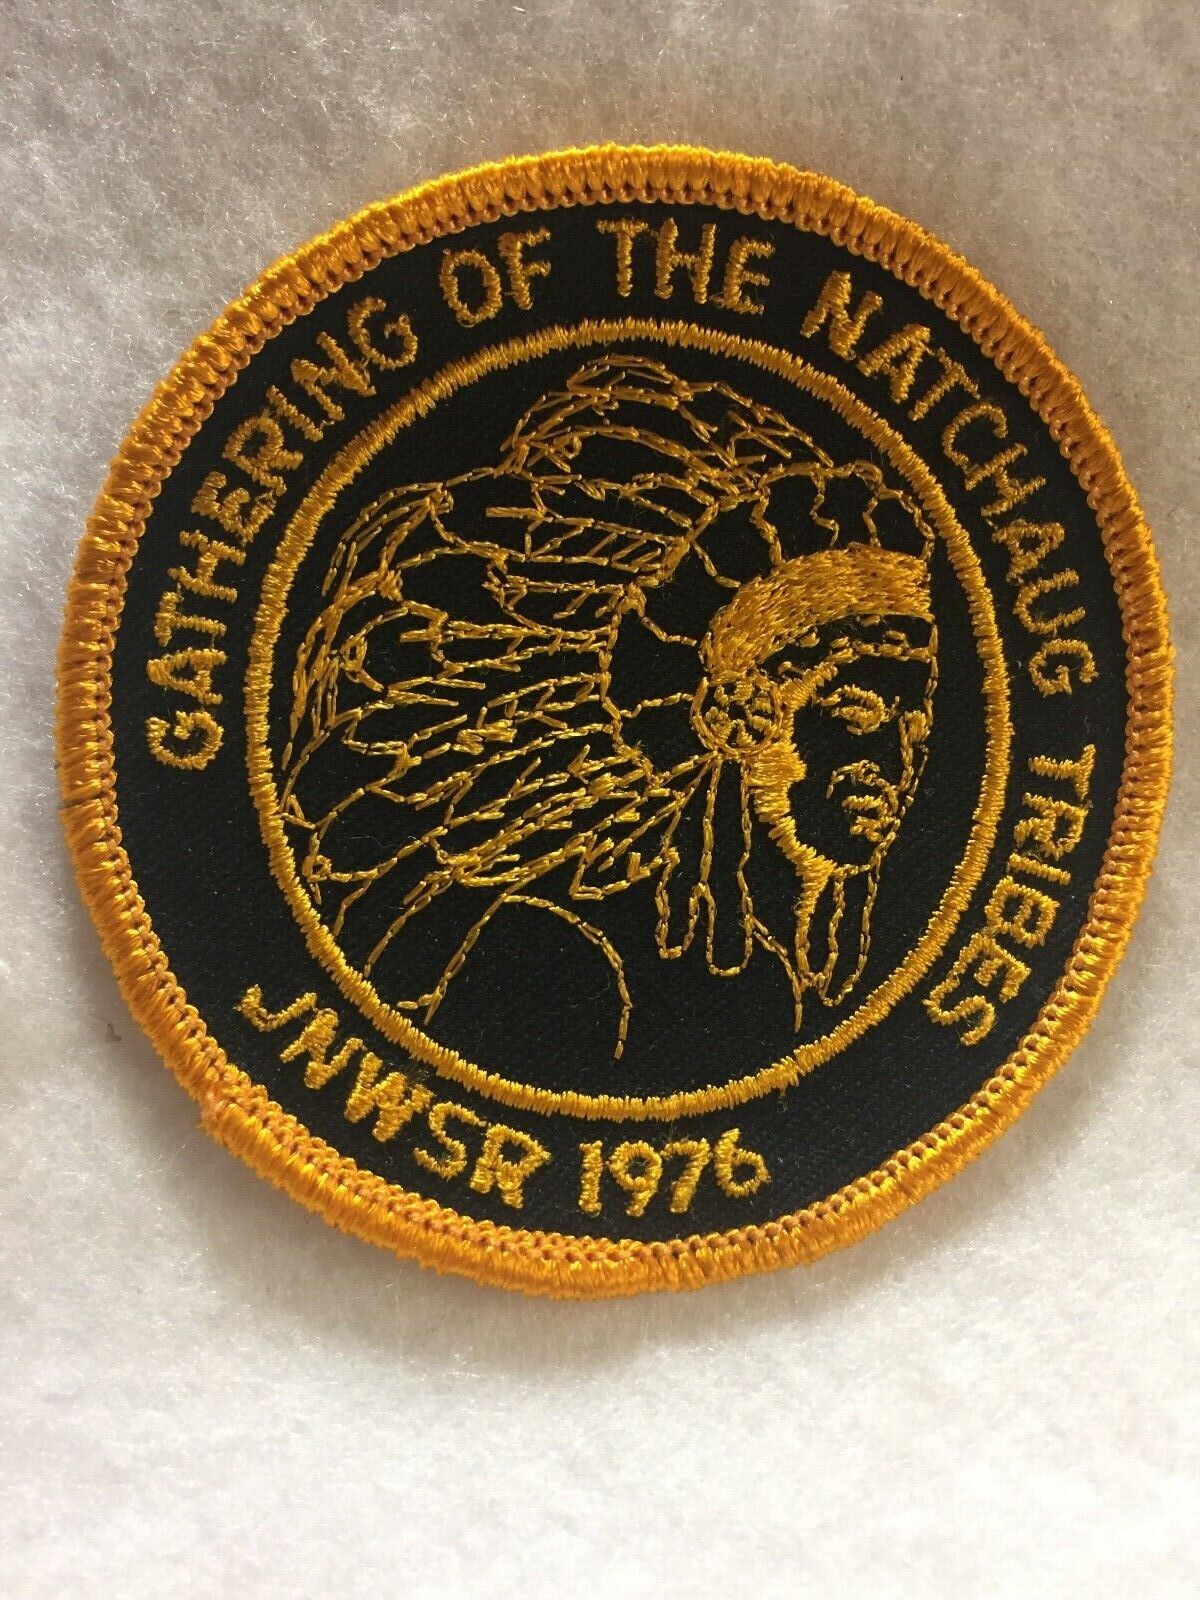 (46) Boy Scouts -  Gathering of the Natchaug Tribes @ JN Webster SR - 1976 (CT)